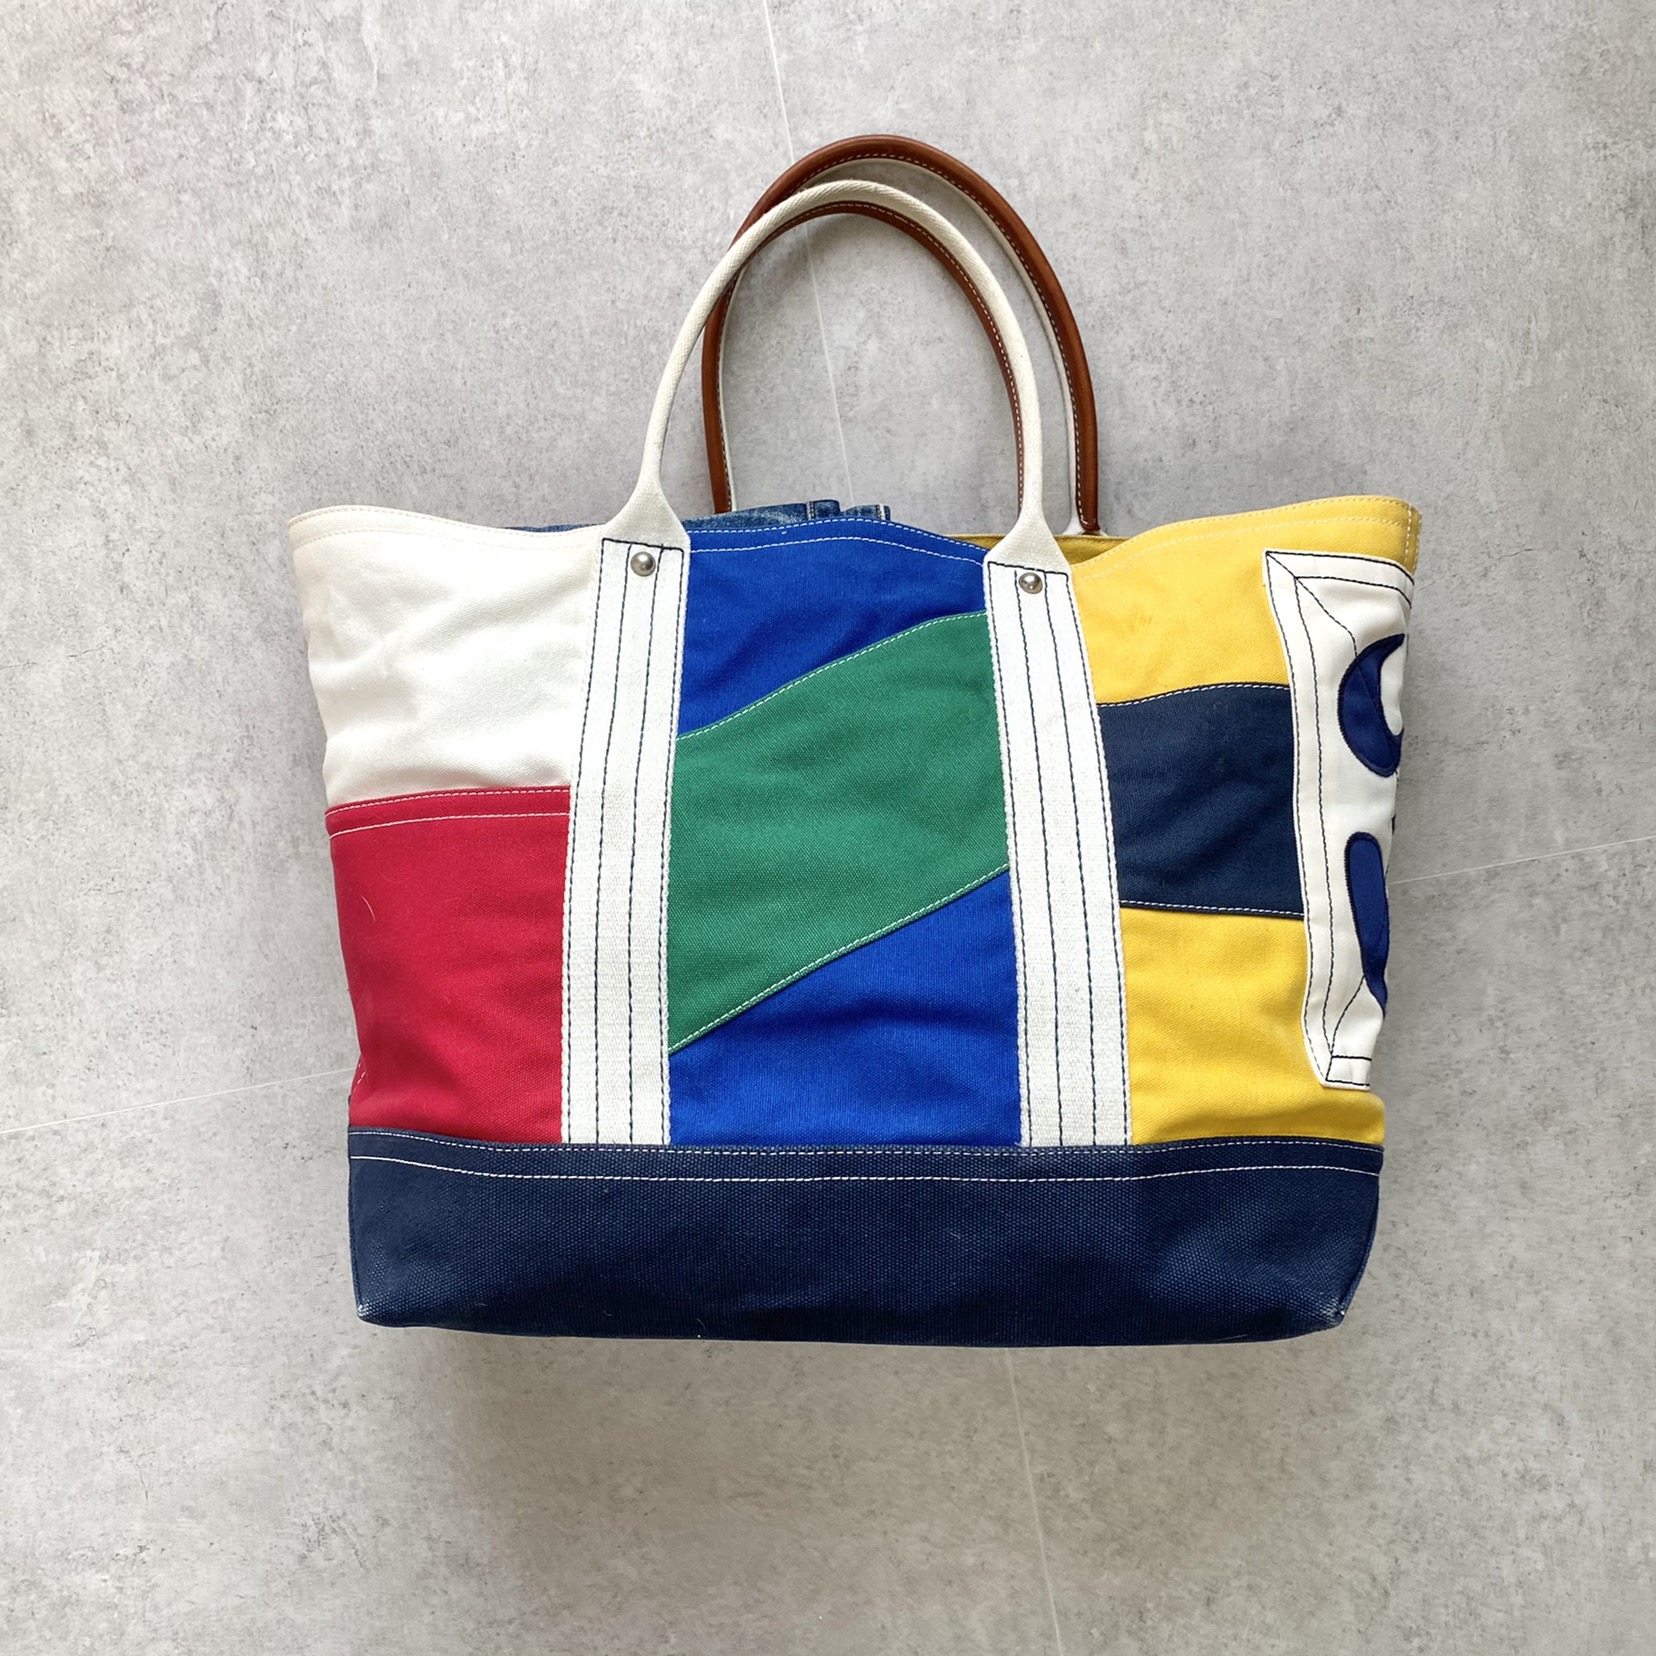 Rugby Ralph Lauren Mix Matched Colorway Canvas Tote Bag - 체리피커